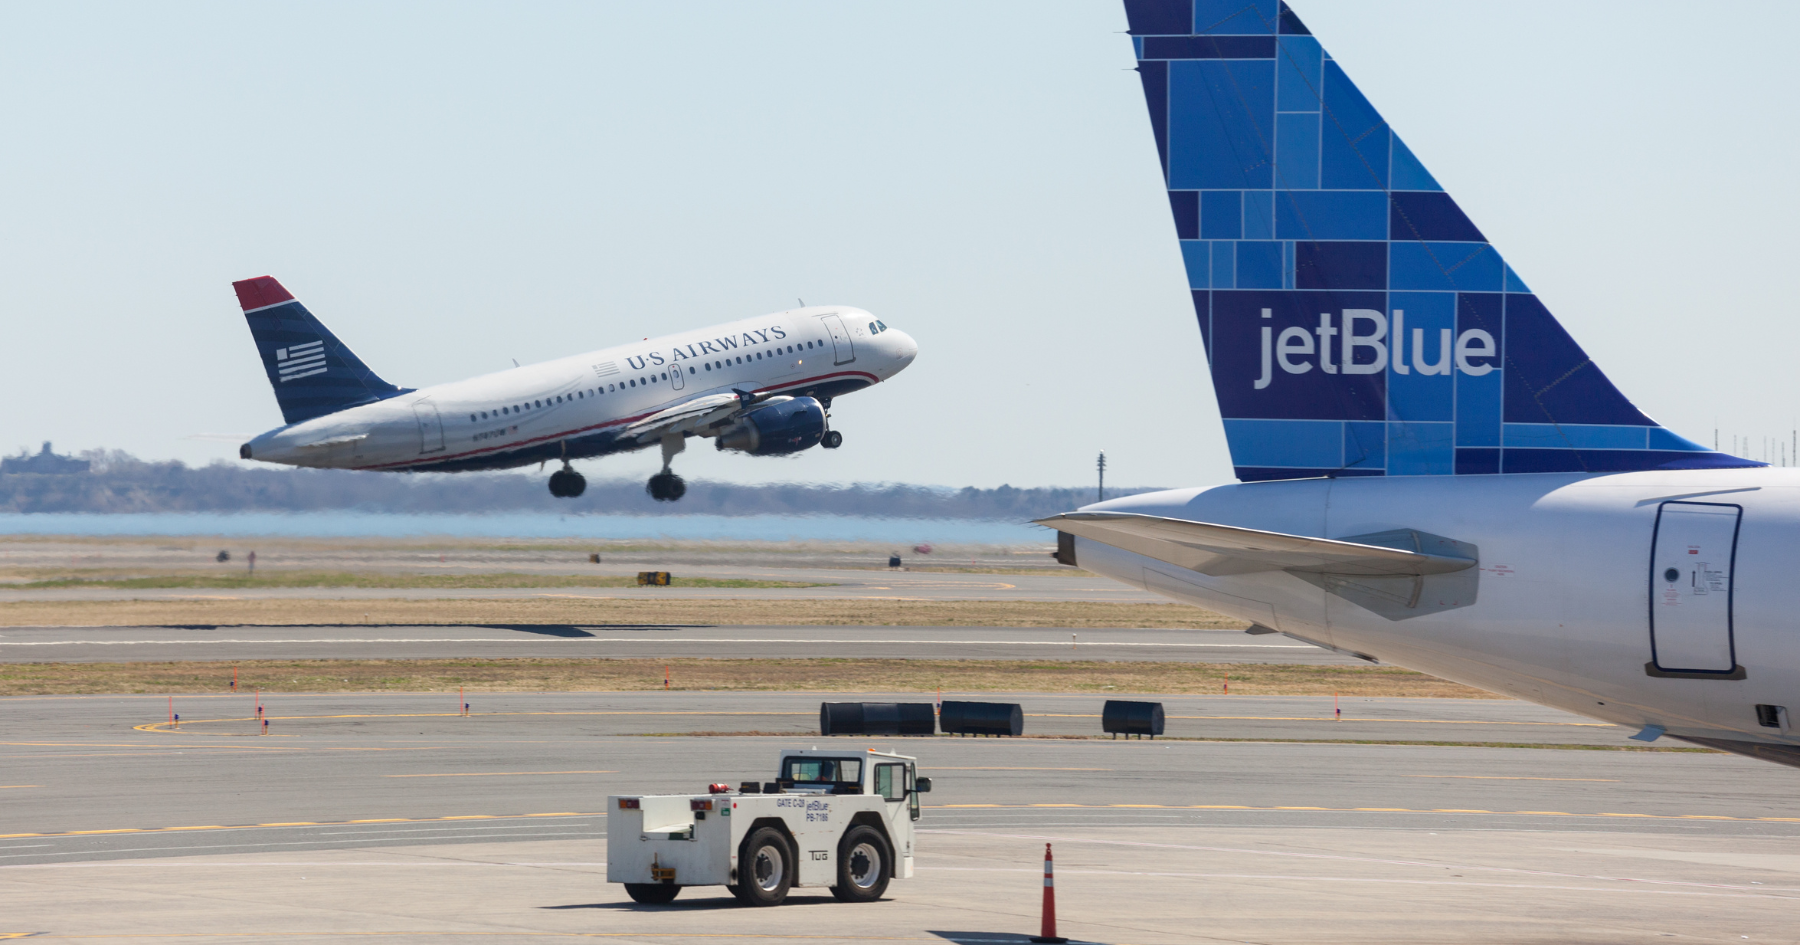 Turbulence in the Air Spirit Airlines' Setback as Merger with JetBlue Hits a Snag